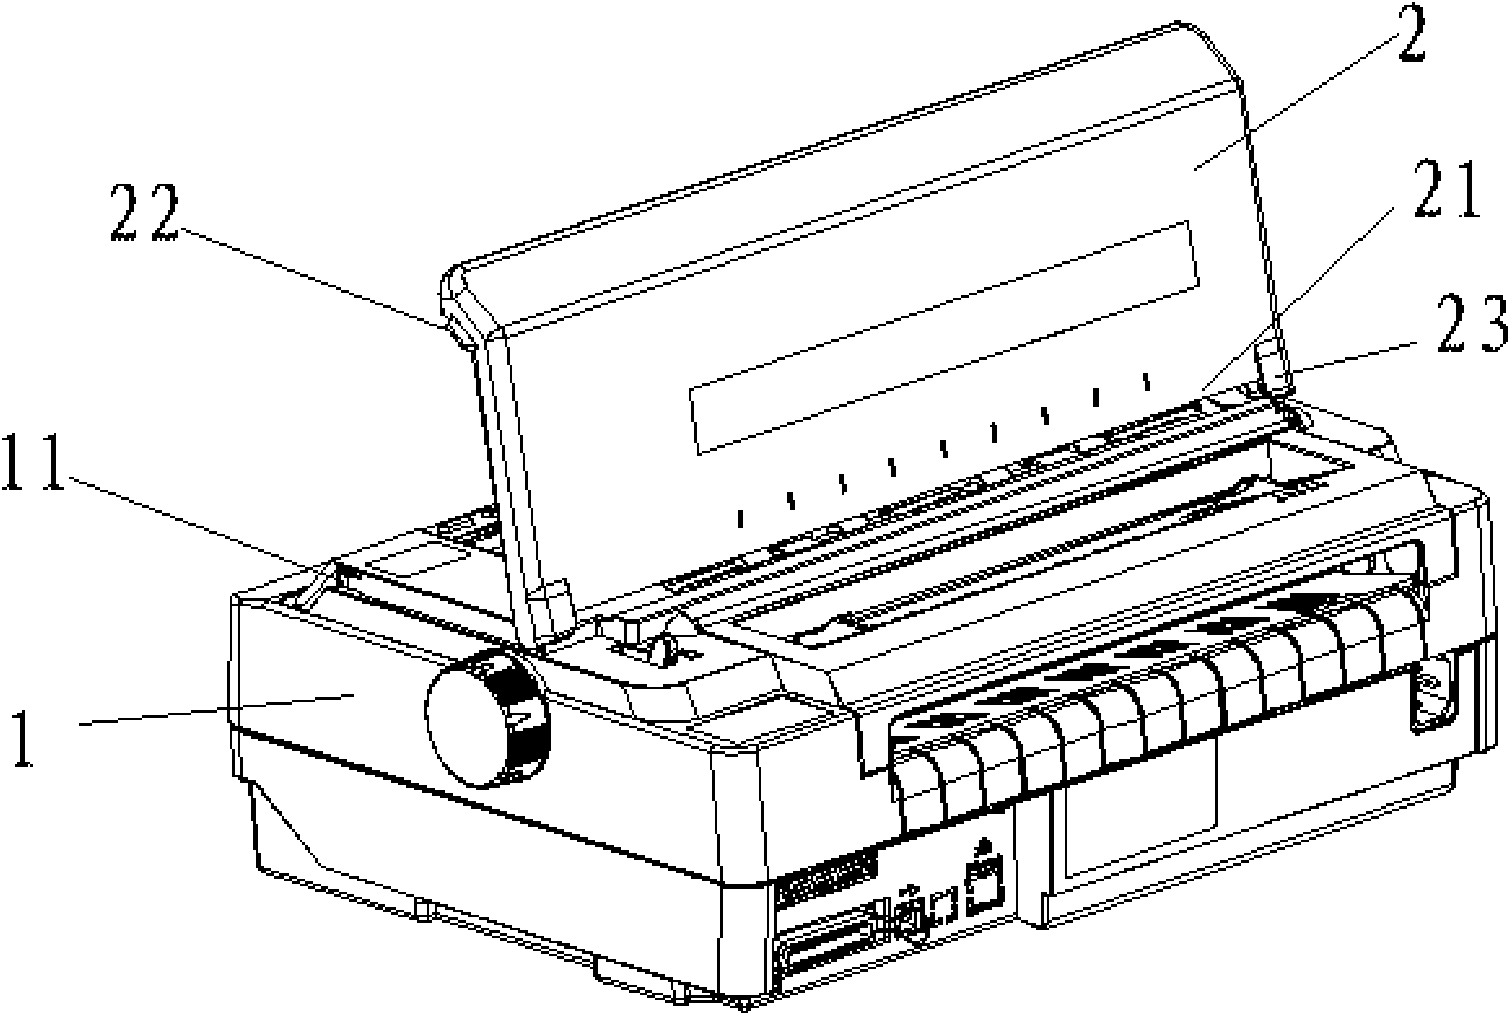 Upper cover structure of post articulated printer with paper tearing function